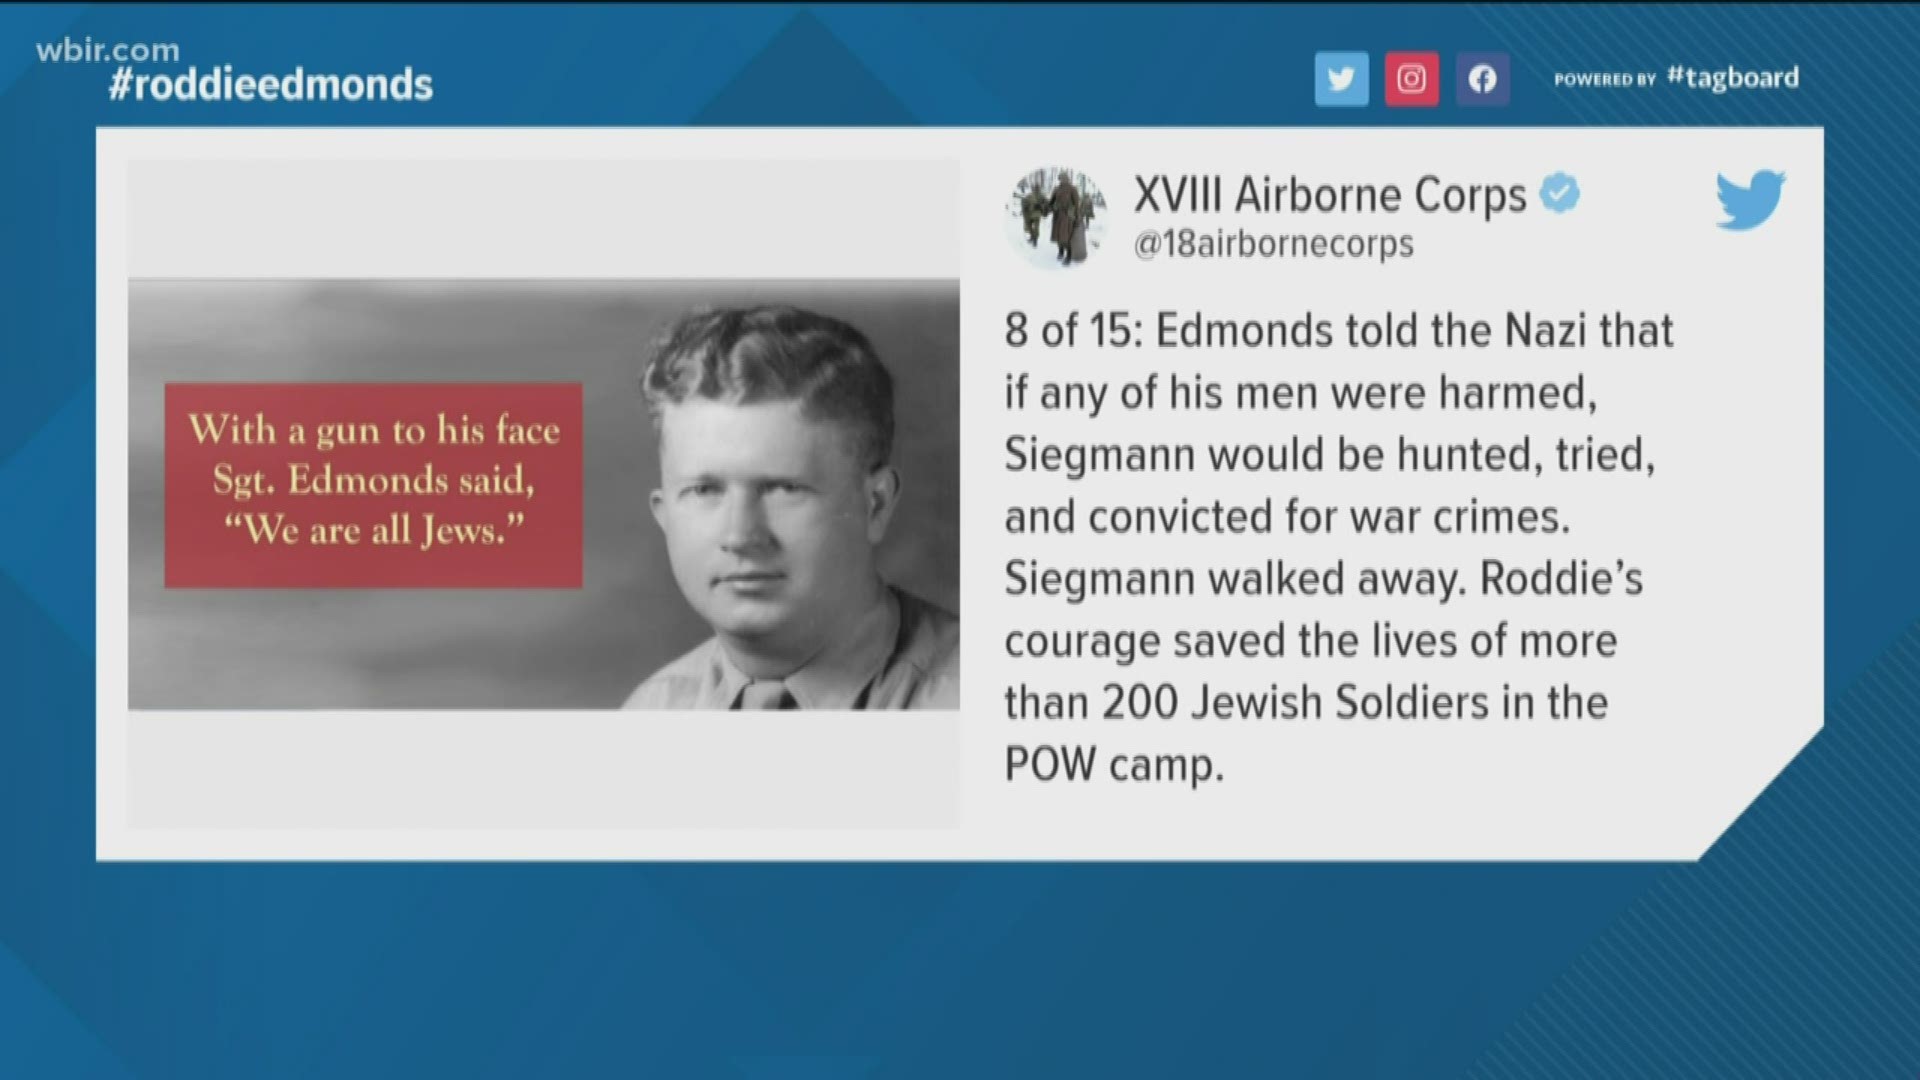 Master Sergeant Roddie Edmonds helped save the lives of almost 200 Jewish American soldiers as a POW. His story remained hidden in history for more than sixty years.